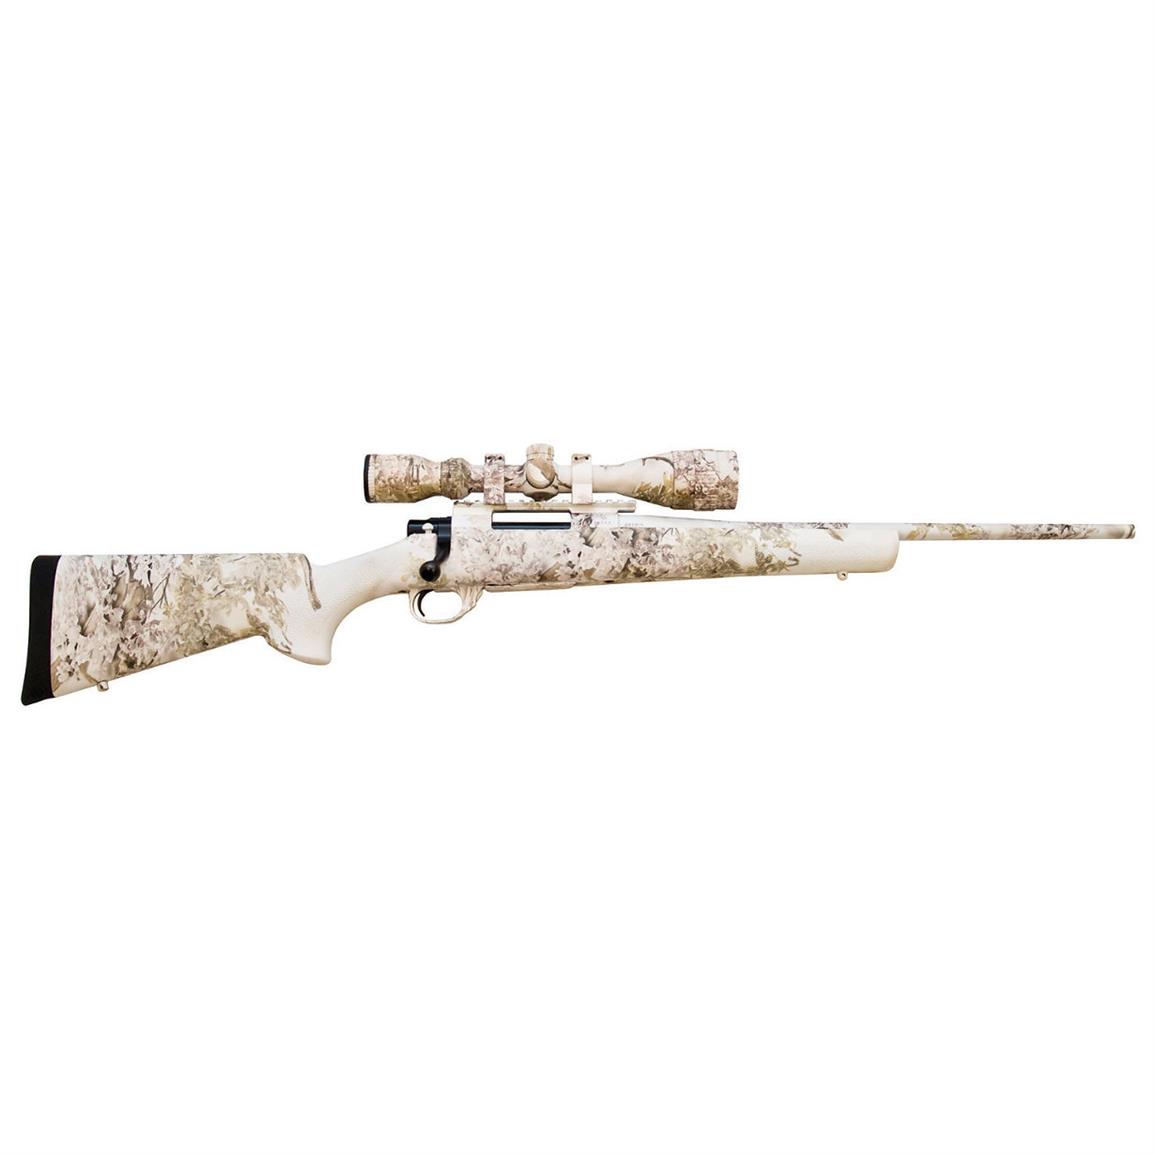 LSI Howa Hogue Snowking Package, Bolt Action, .22-250 Remington, Centerfire, HGK61207SNW, 682146357684, Nikko Stirling 4-16x44 Scope